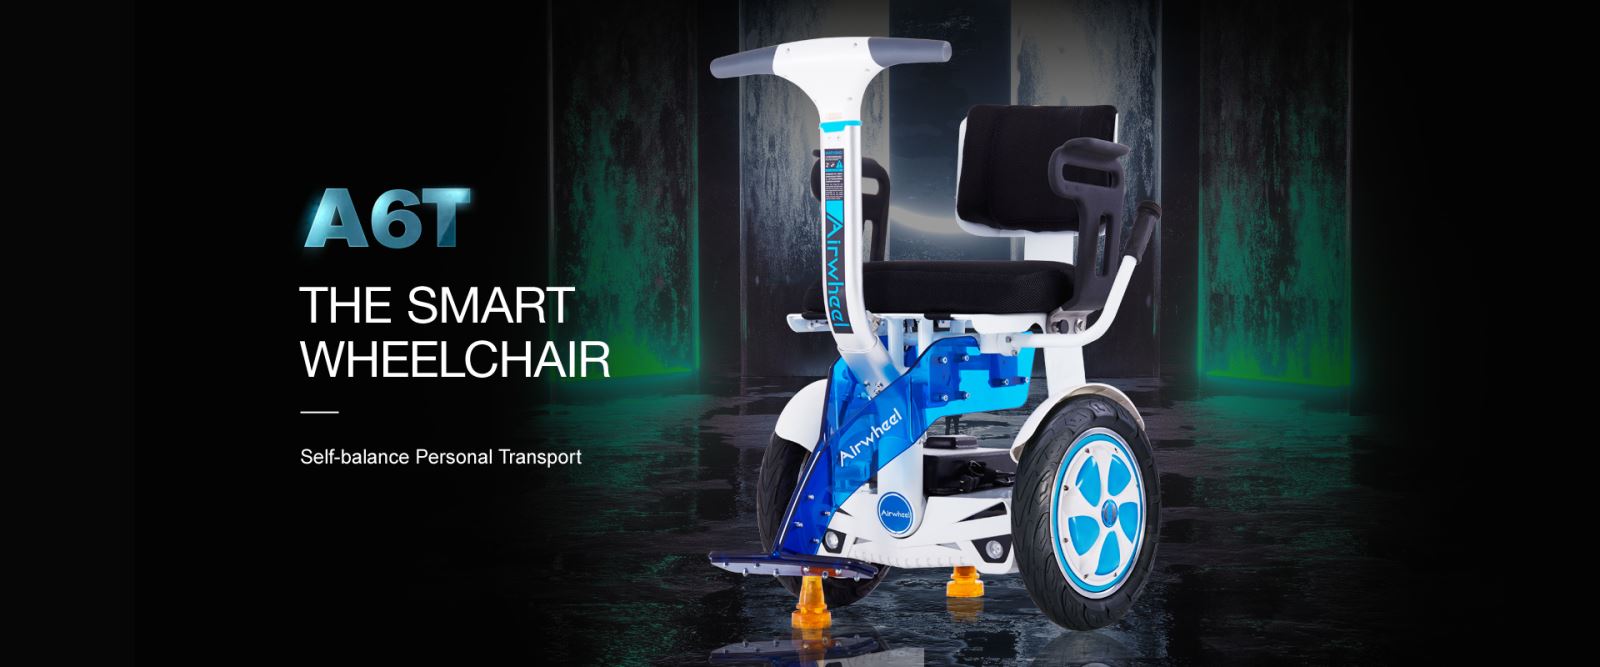 Airwheel A6T WHEELCHAIR LIFT AND MOBILITY AIDS